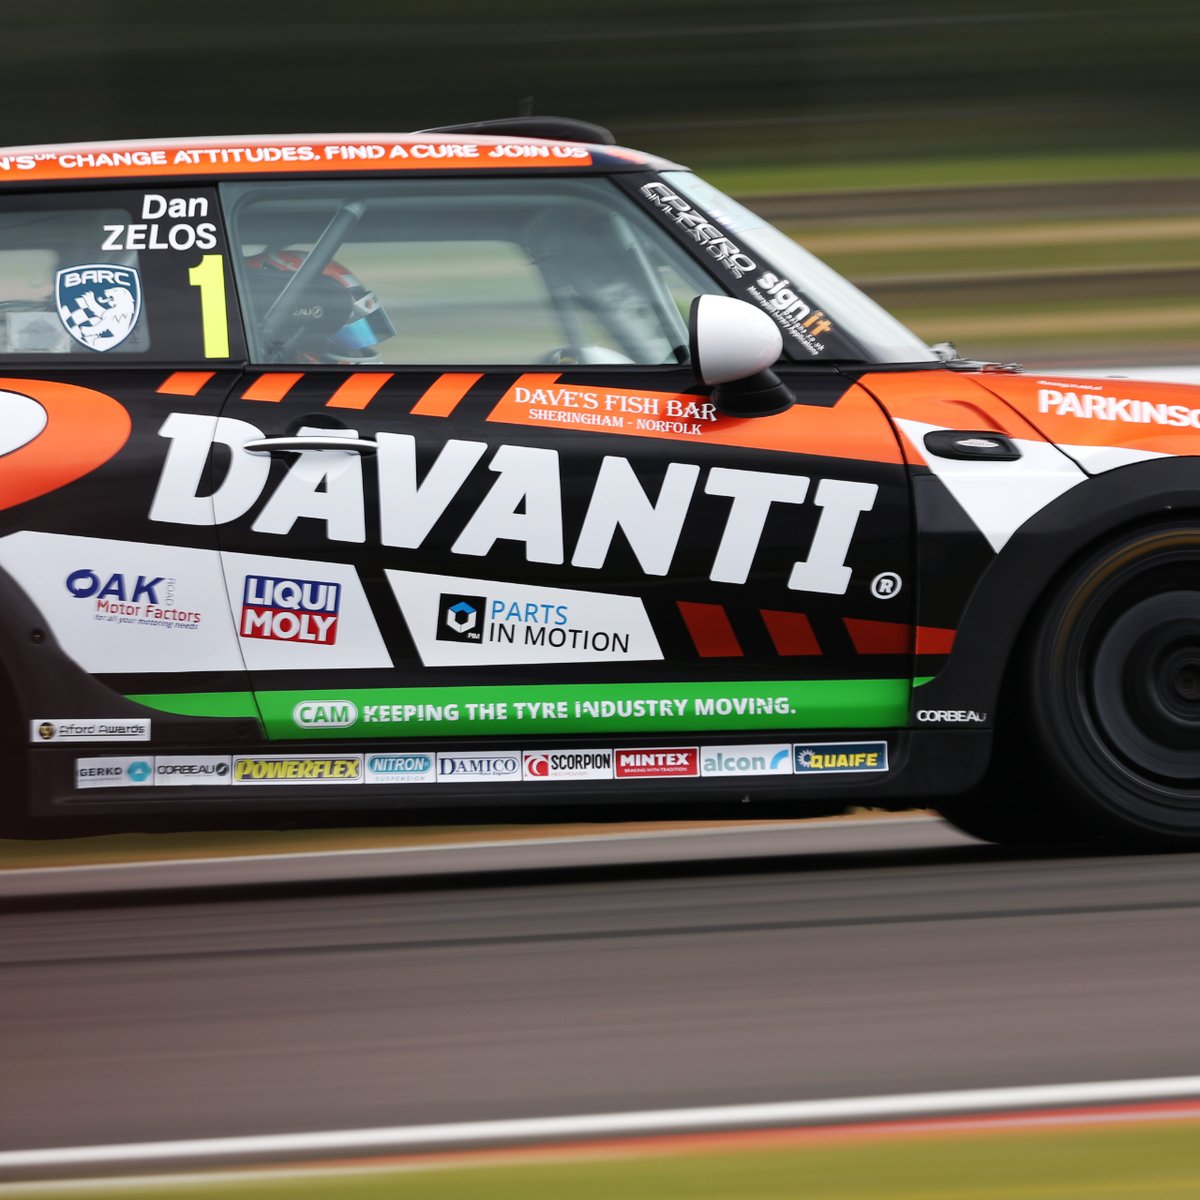 FP1 + FP2 done ✅ Very different conditions compared to a fortnight ago – it's HOT! 🥵  Some solid laps under our belt today ready for tomorrow 👊 #DZ45 #DanZelos45 #racingdriver #motorsport #racing #freepractice #fp1 #fp2 #results #brandshatch #indycircuit #davanti #tyres